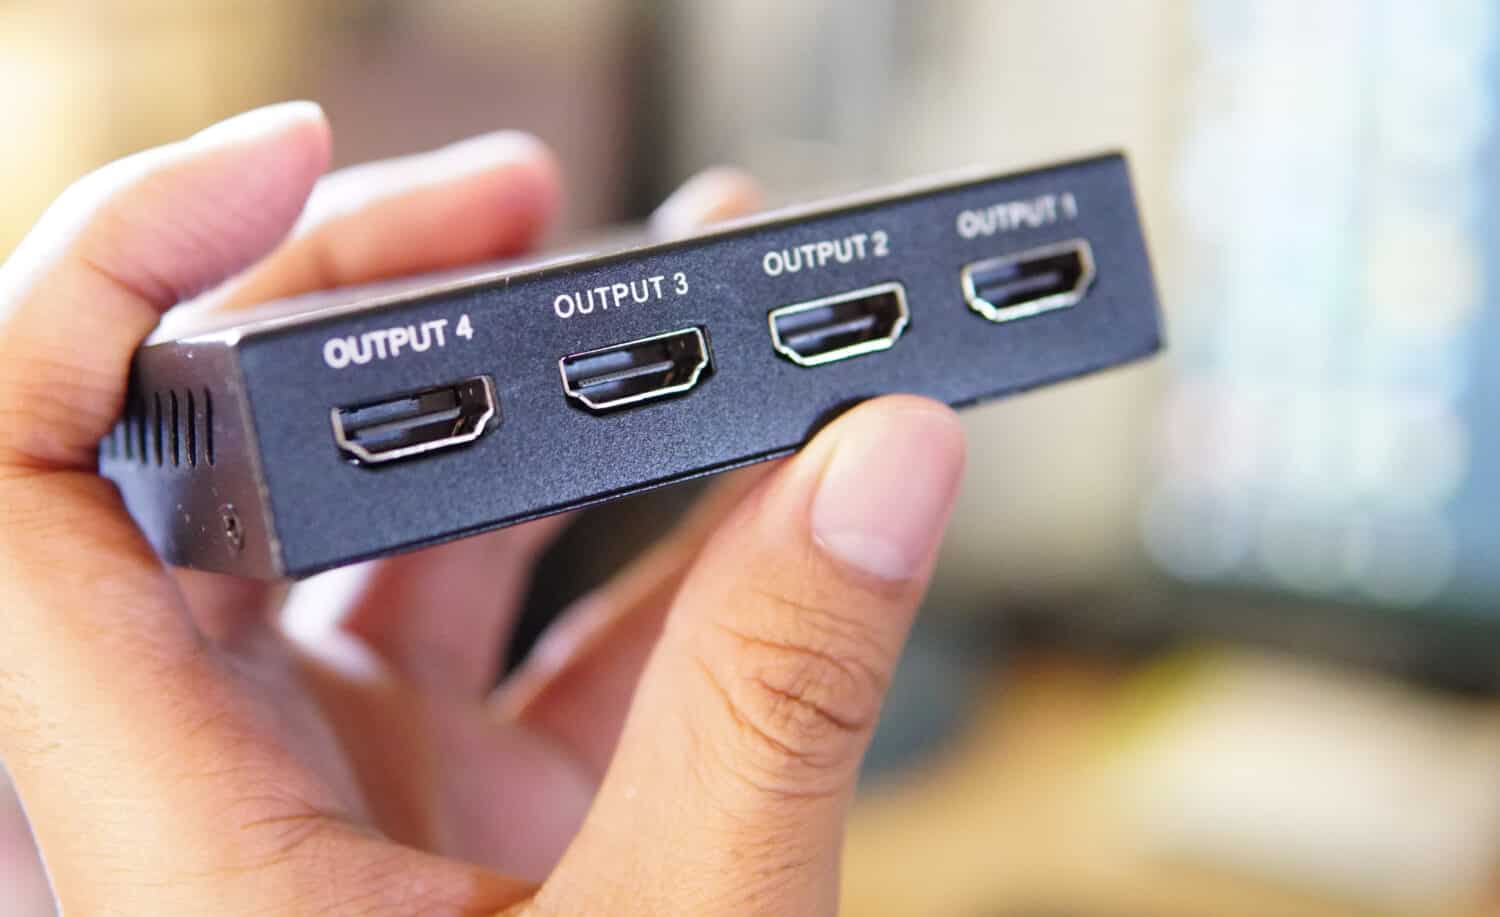 2-Port HDMI Splitter 1 In 2 Out, 4K 60Hz - HDMI® Splitters, Audio-Video  Products